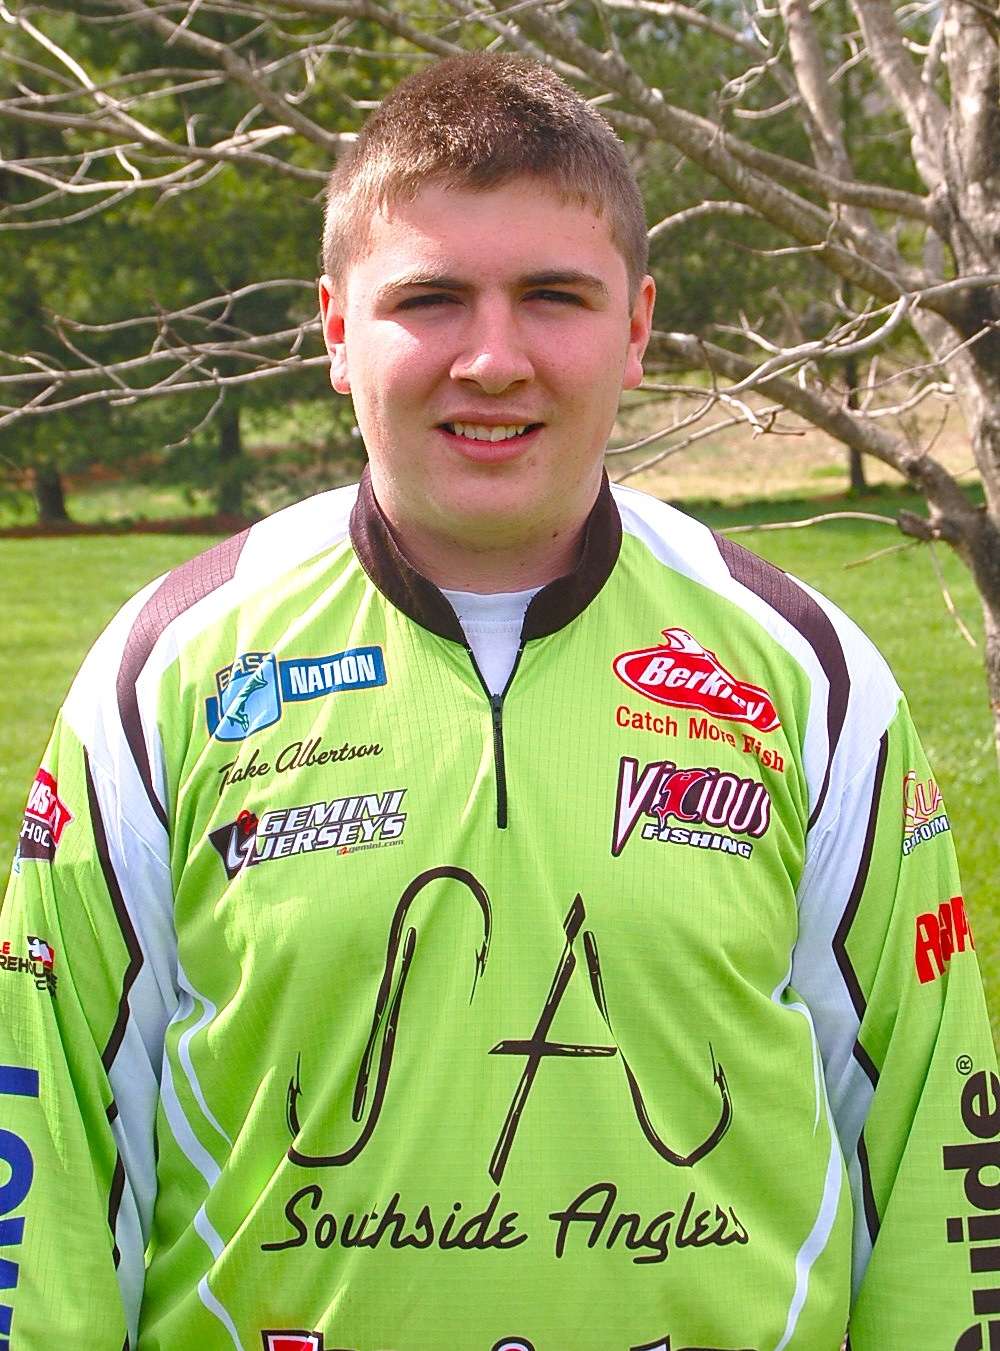 <b>Indiana: Blake Albertson</b><br>
Albertson, of Bloomington, Ind., established a club to be able to compete in the B.A.S.S. sanctioned events. He constantly shares his knowledge with all members of his club by taking them fishing and helping them with techniques. Albertson won the 2015 angler of the year award on the high school trail.
